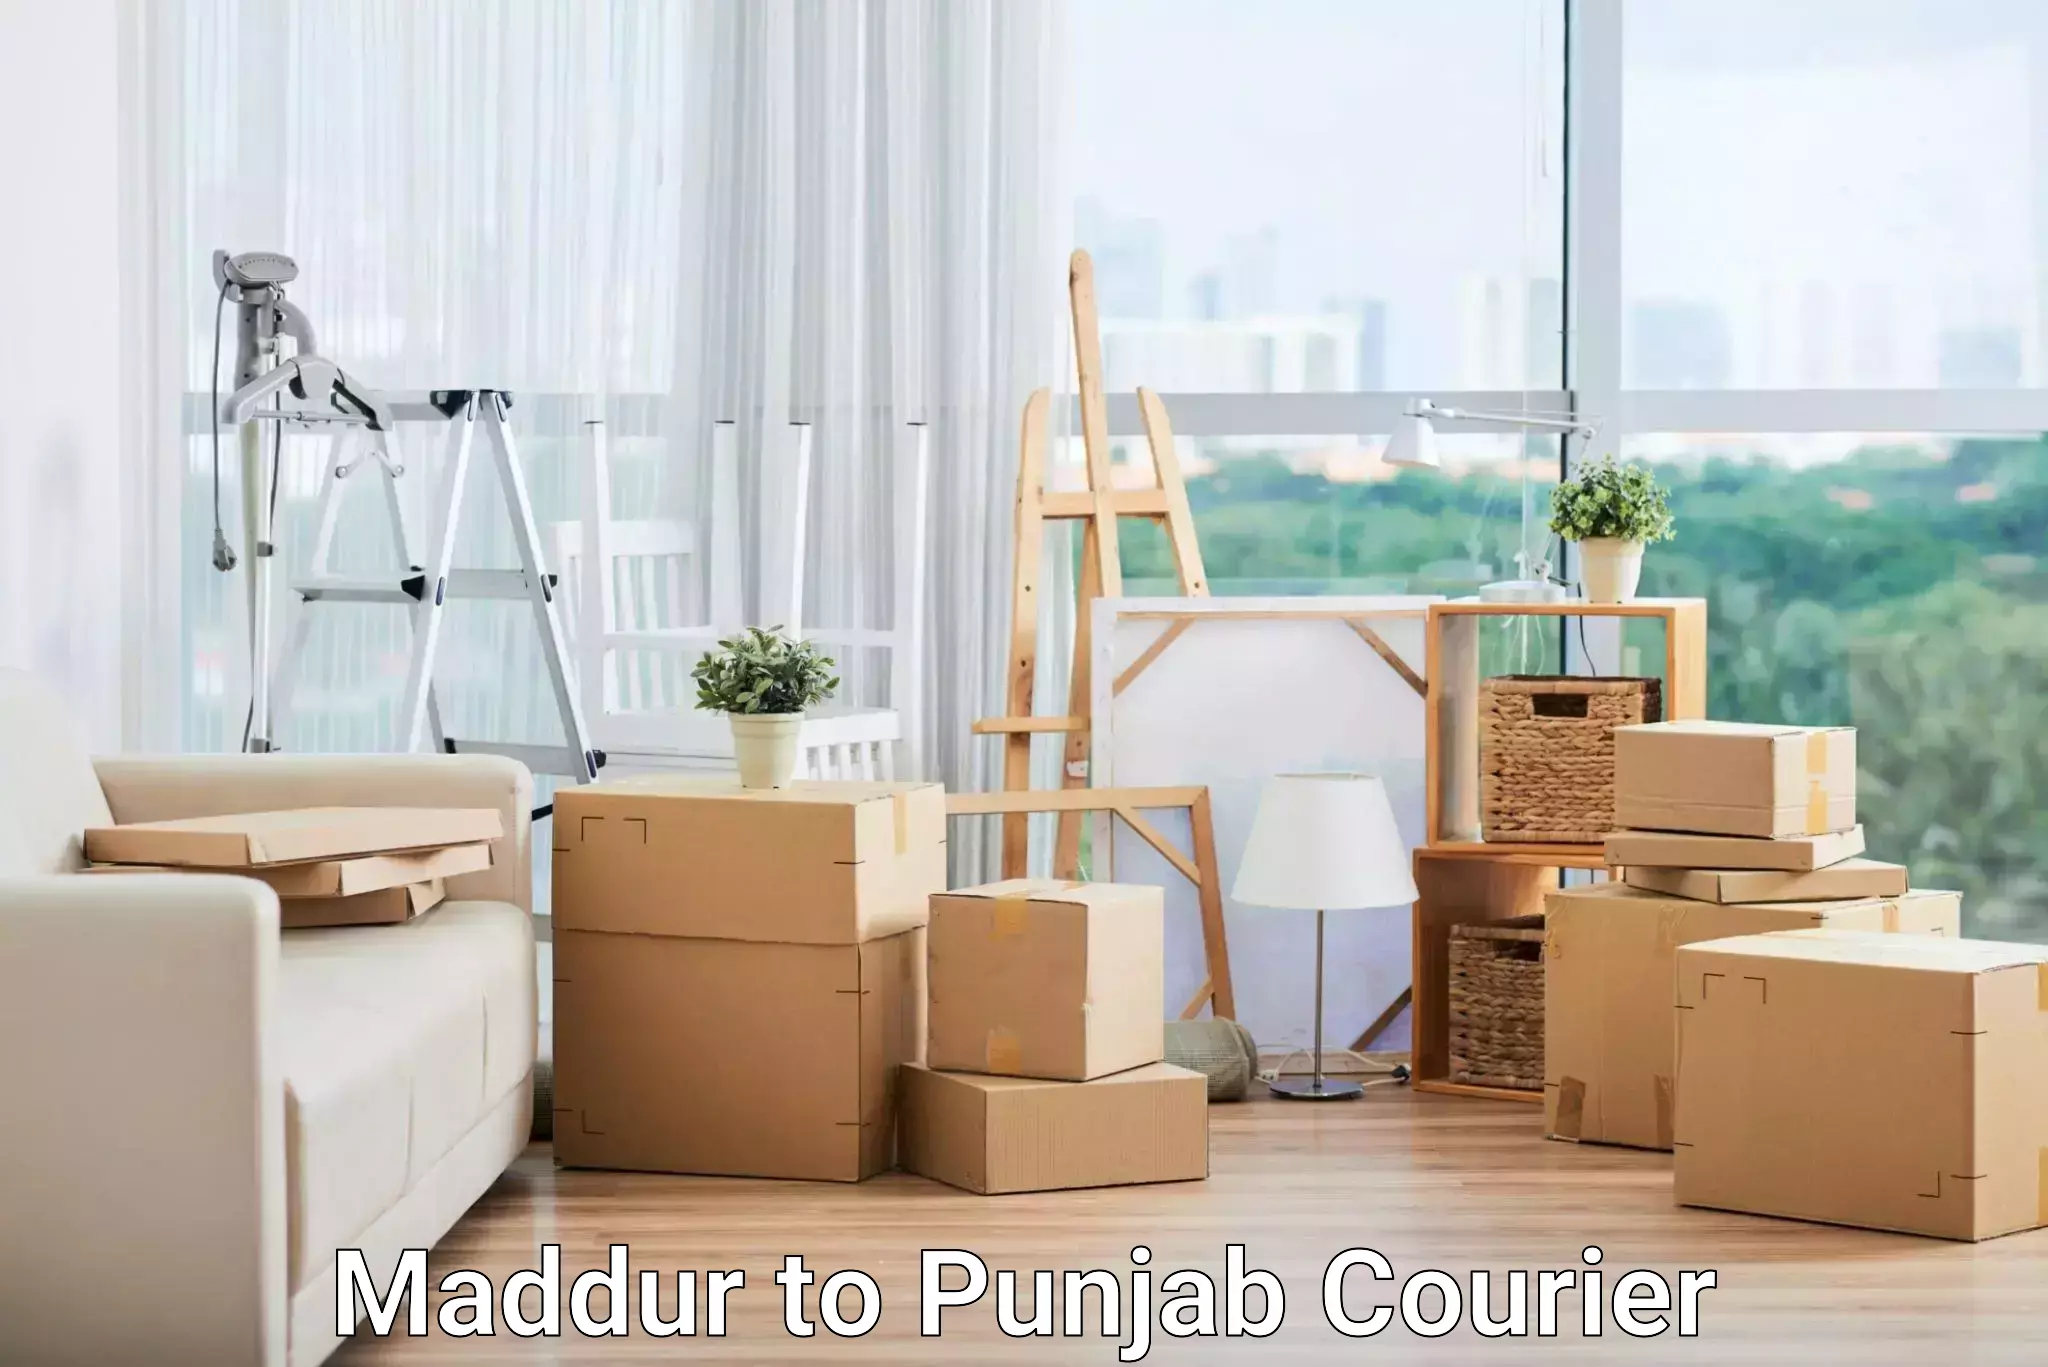 Courier service partnerships in Maddur to Ropar